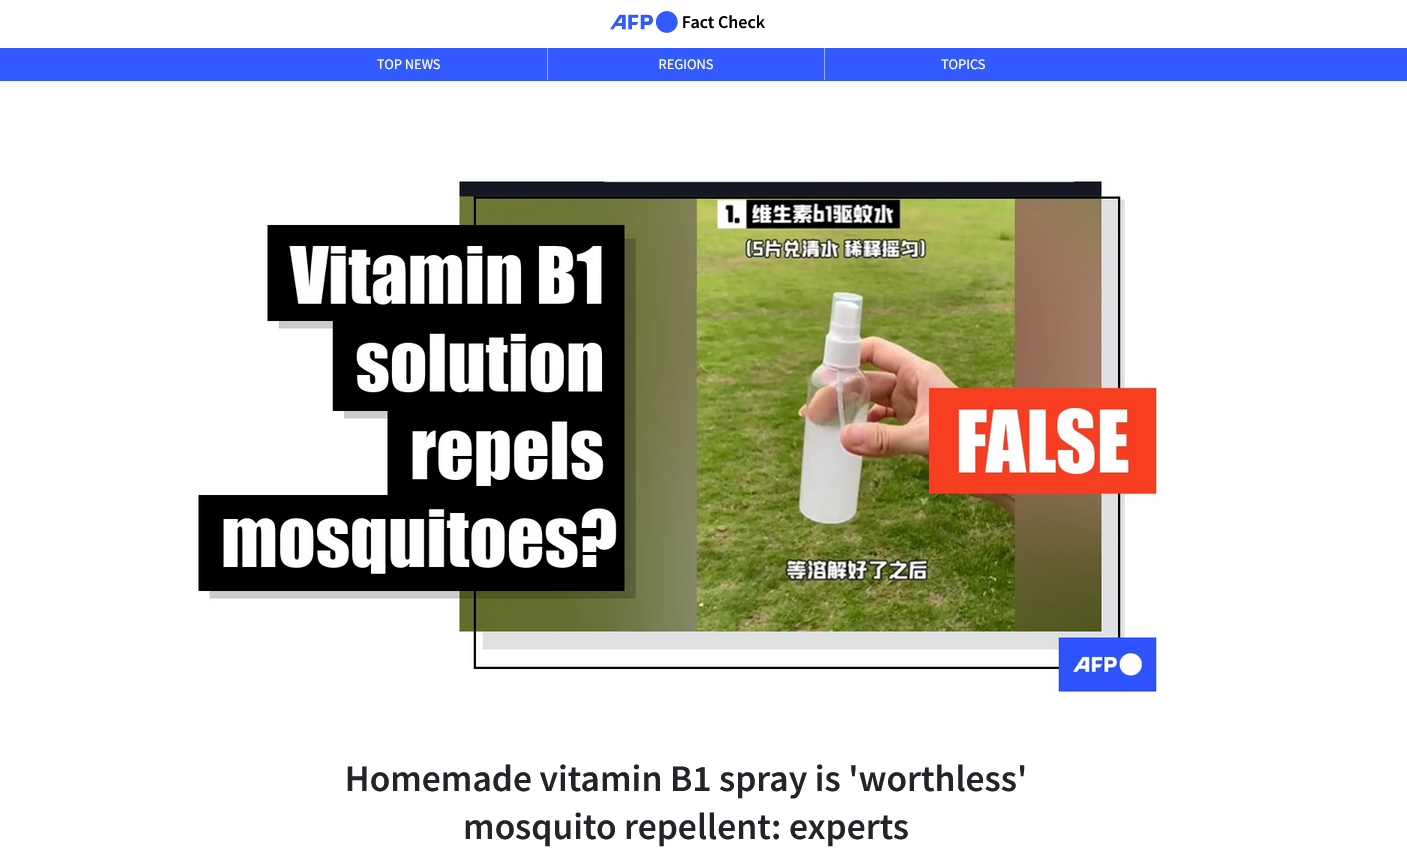 vitamin b1 solution repels mosquitoes